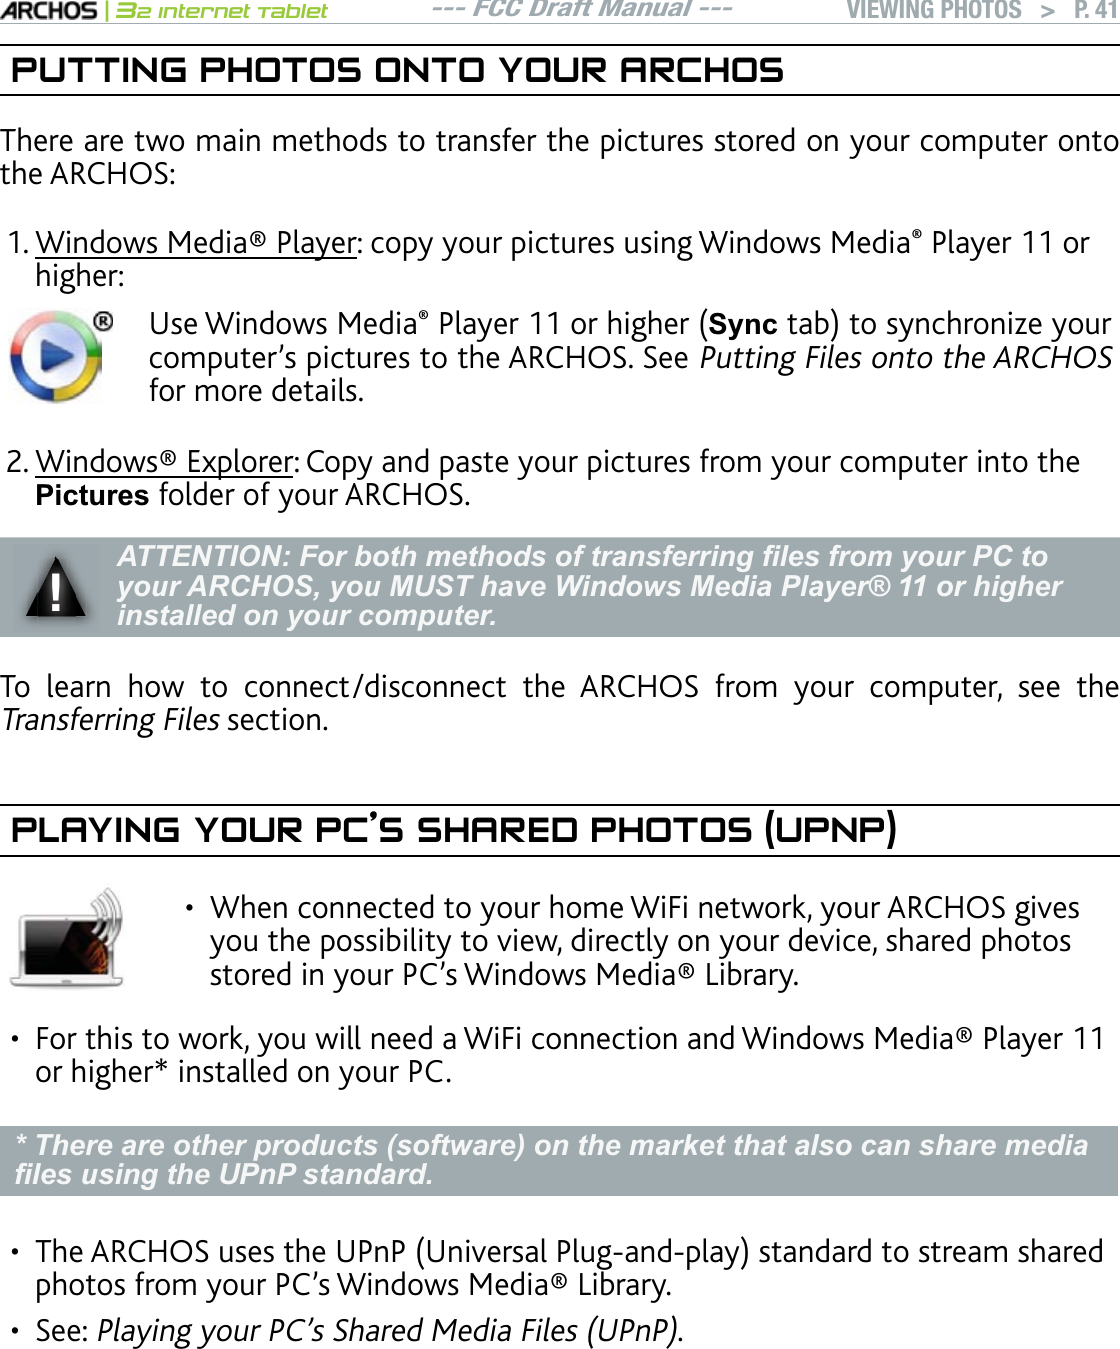 --- FCC Draft Manual ---|32 Internet TabletVIEWING PHOTOS   &gt; P. 41PUTTING PHOTOS ONTO YOUR ARCHOSThere are two main methods to transfer the pictures stored on your computer onto the ARCHOS:9KPFQYU/GFKC2NC[GT: copy your pictures using Windows Media Player 11 or higher:Use Windows Media2NC[GTQTJKIJGT6\QFVCDVQU[PEJTQPK\G[QWTEQORWVGTlURKEVWTGUVQVJG#4%*155GGPutting Files onto the ARCHOSfor more details.9KPFQYUExplorer: Copy and paste your pictures from your computer into the 3LFWXUHV folder of your ARCHOS.ʆ!$77(17,21)RUERWKPHWKRGVRIWUDQVIHUULQJ¿OHVIURP\RXU3&amp;WRyour ARCHOS, you MUST have Windows Media Player® 11 or higher installed on your computer.To learn how to connect/disconnect the ARCHOS from your computer, see the Transferring Files section.PLAYING YOUR PC’S SHARED PHOTOS (UPNP)When connected to your home WiFi network, your ARCHOS gives you the possibility to view, directly on your device, shared photos UVQTGFKP[QWT2%lU9KPFQYU/GFKC.KDTCT[•(QTVJKUVQYQTM[QWYKNNPGGFC9K(KEQPPGEVKQPCPF9KPFQYU/GFKC2NC[GTor higher* installed on your PC. * There are other products (software) on the market that also can share media ¿OHVXVLQJWKH83Q3VWDQGDUG6JG#4%*15WUGUVJG72P27PKXGTUCN2NWICPFRNC[UVCPFCTFVQUVTGCOUJCTGFRJQVQUHTQO[QWT2%lU9KPFQYU/GFKC.KDTCT[See: 2NC[KPI[QWT2%lU5JCTGF/GFKC(KNGU72P2. If you cannot install Windows Media® Player 11 or higher, it is possible to ac-FHVVDQGVWUHDP\RXU3&amp;¶V¿OHVIURPWKH$5&amp;+26)LOH%URZVHU6HHBrowsingOther Computers on the Network.1.2.•••